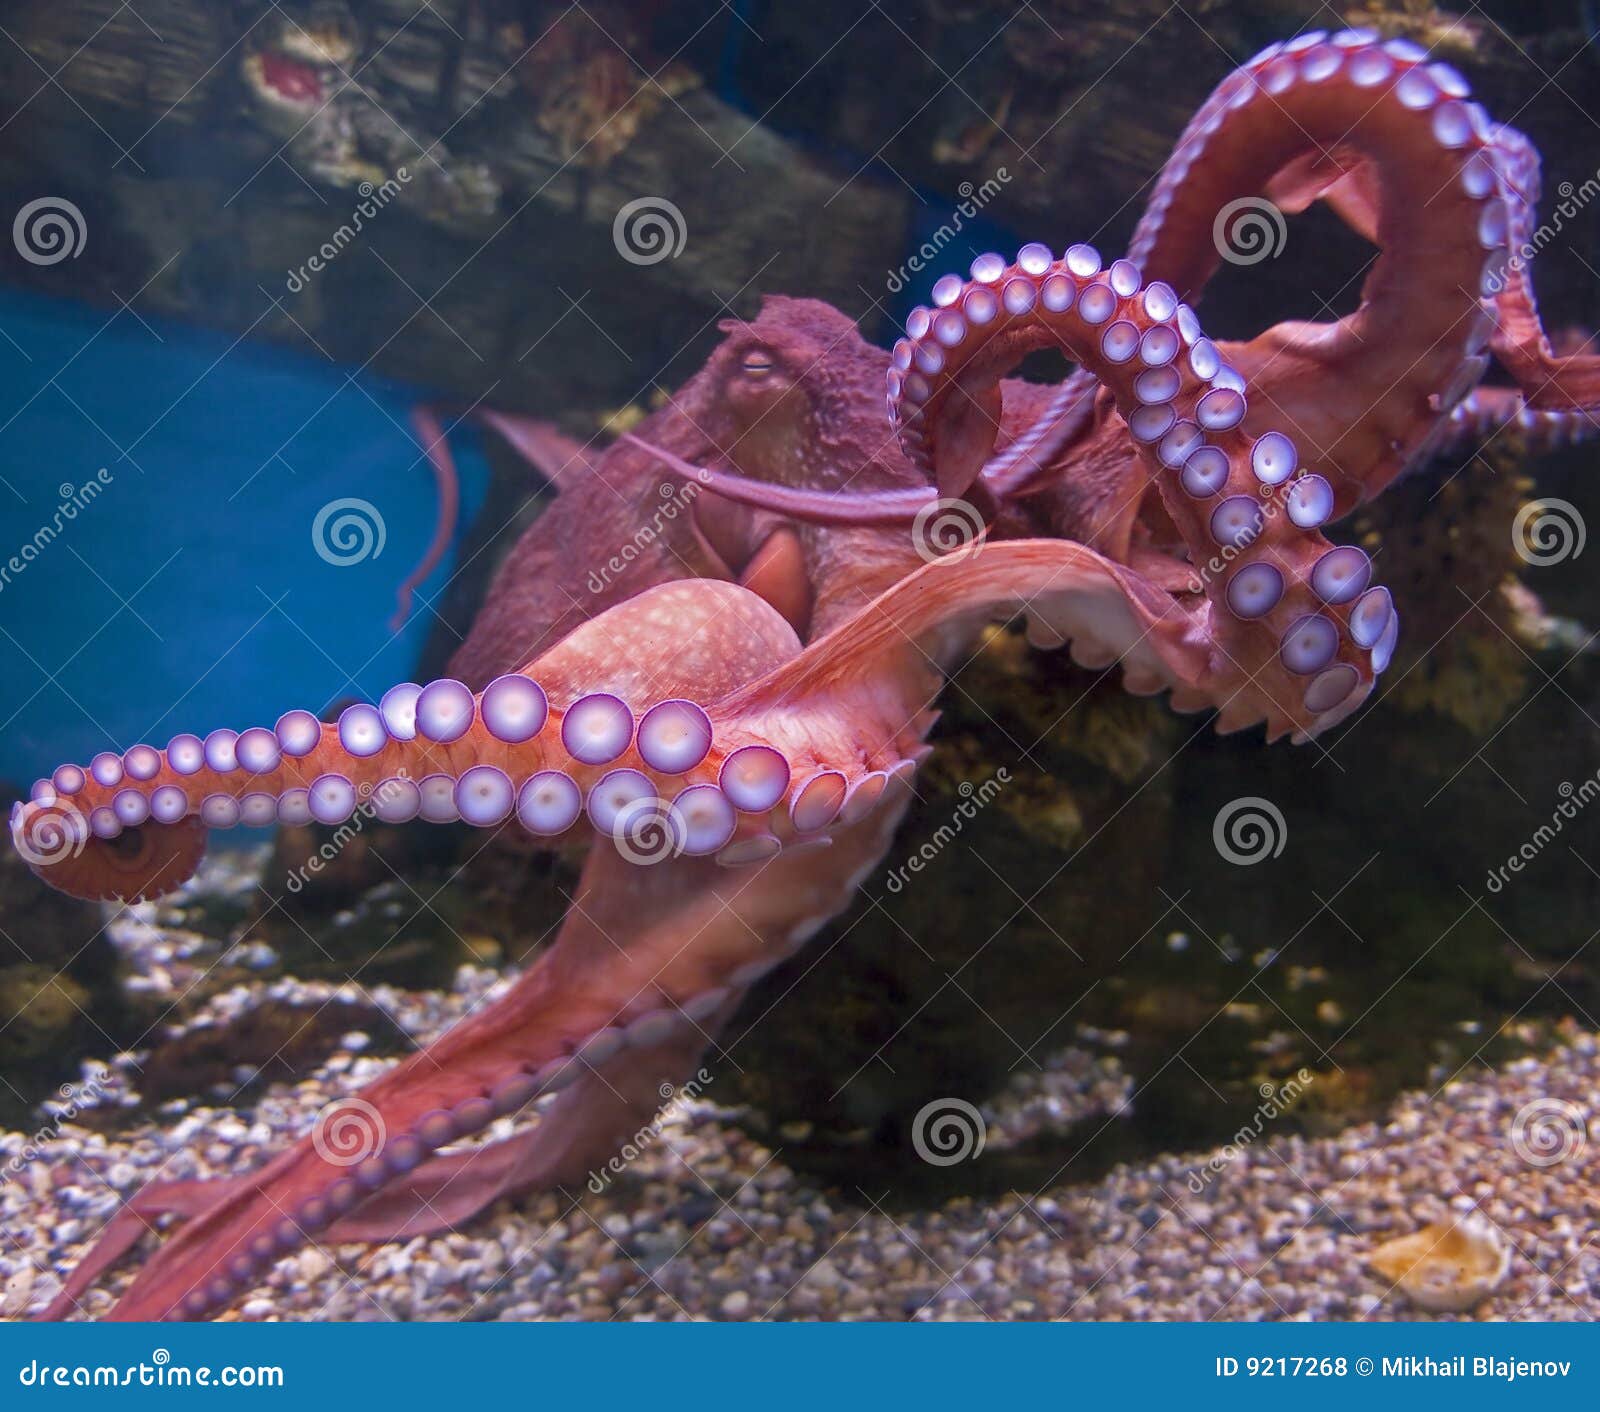 giant pacific octopus 1